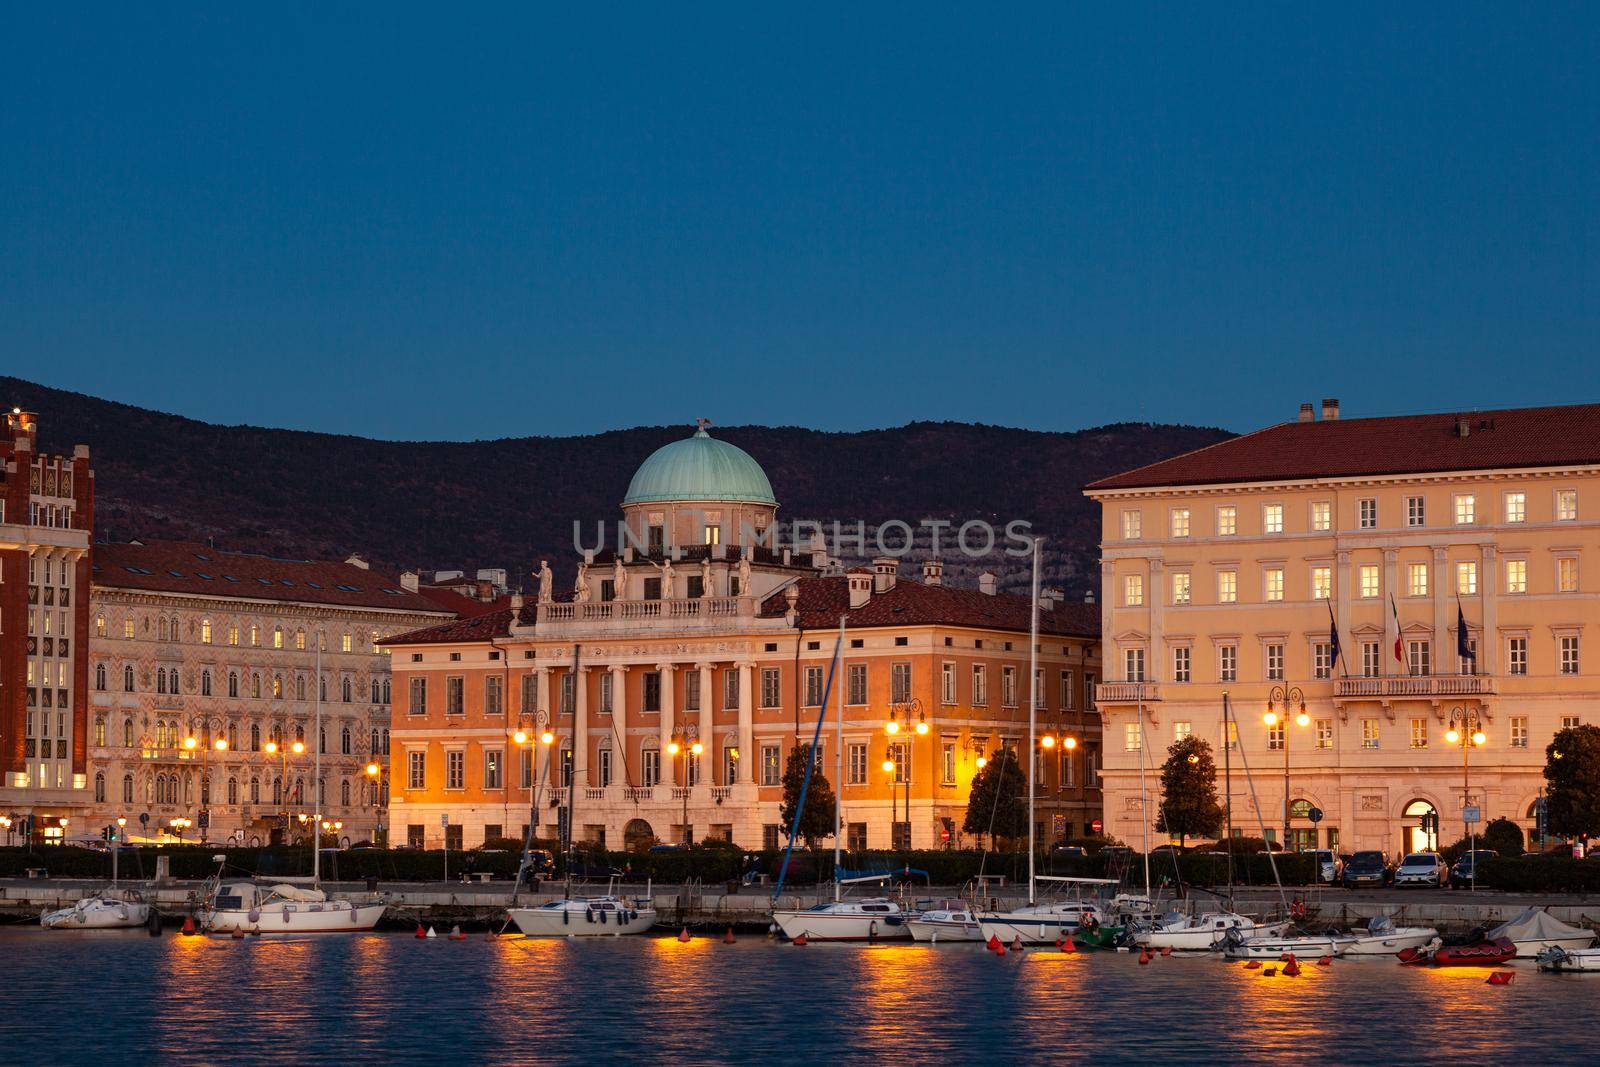 Evening view of the Palazzo Carciotti in Trieste by bepsimage